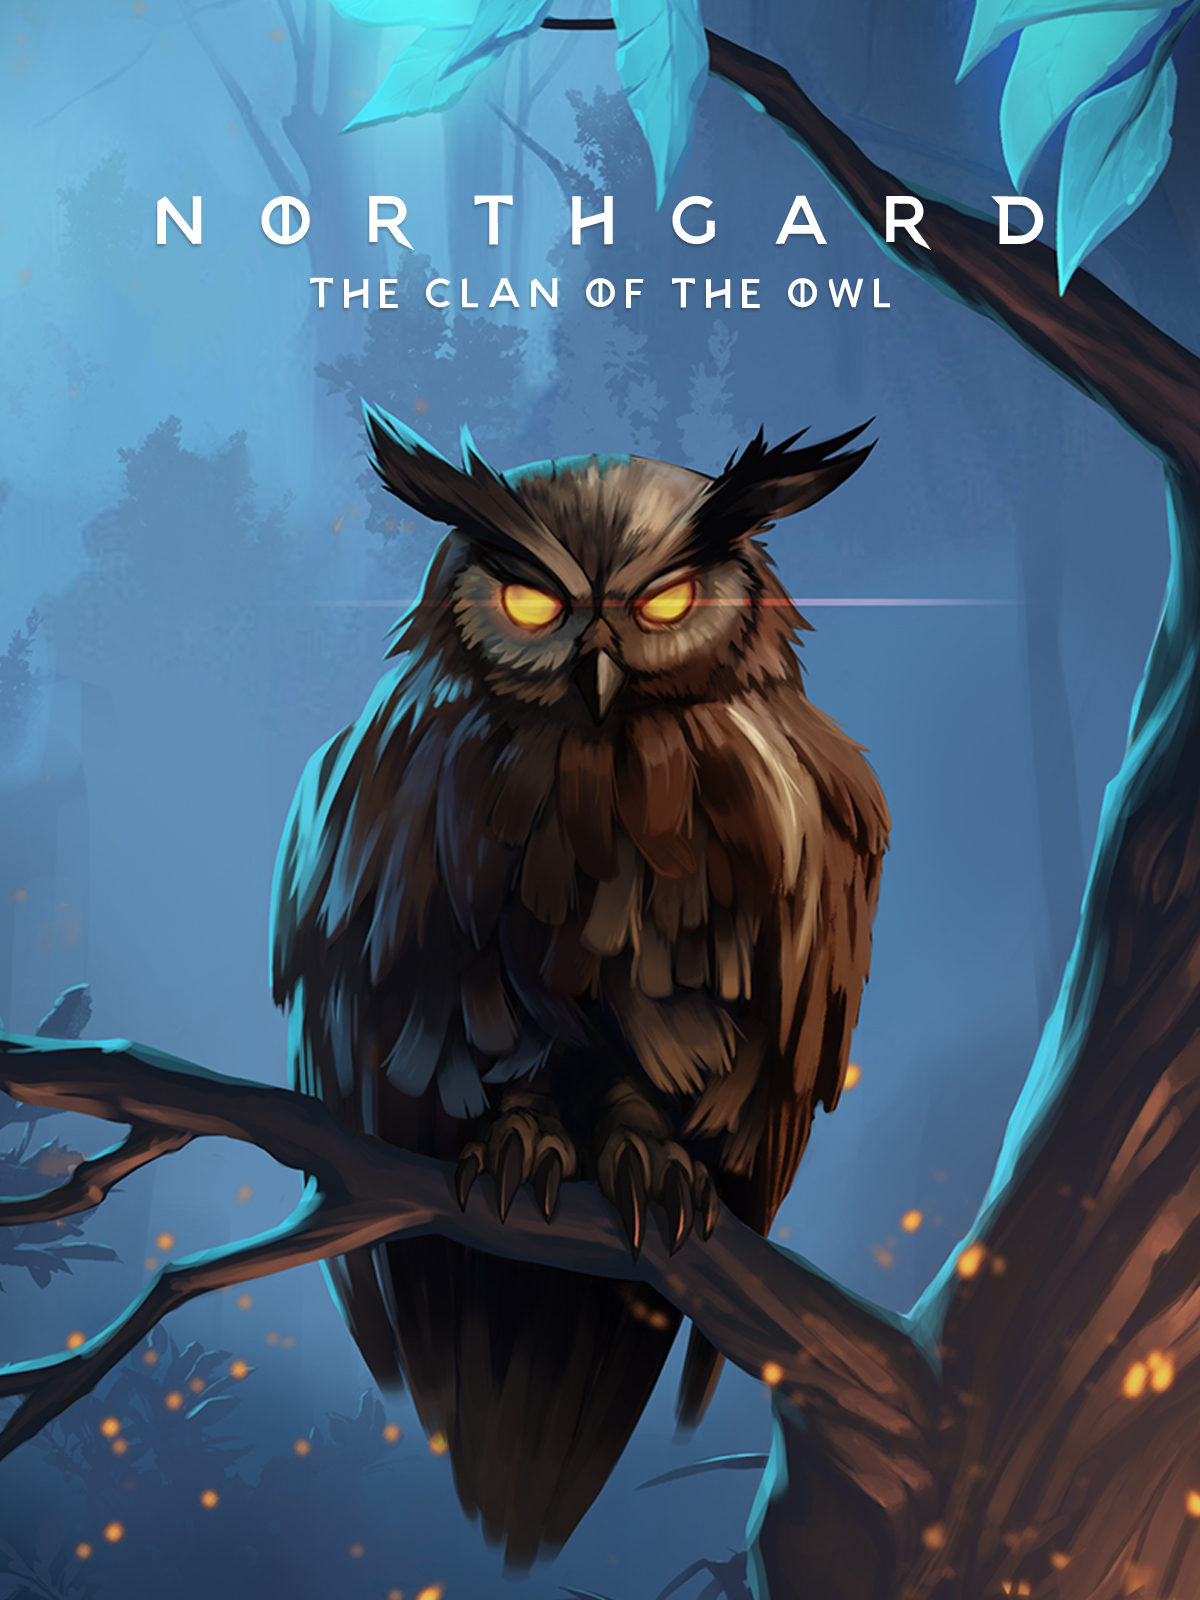 Картинка Northgard - Vordr, Clan of the Owl